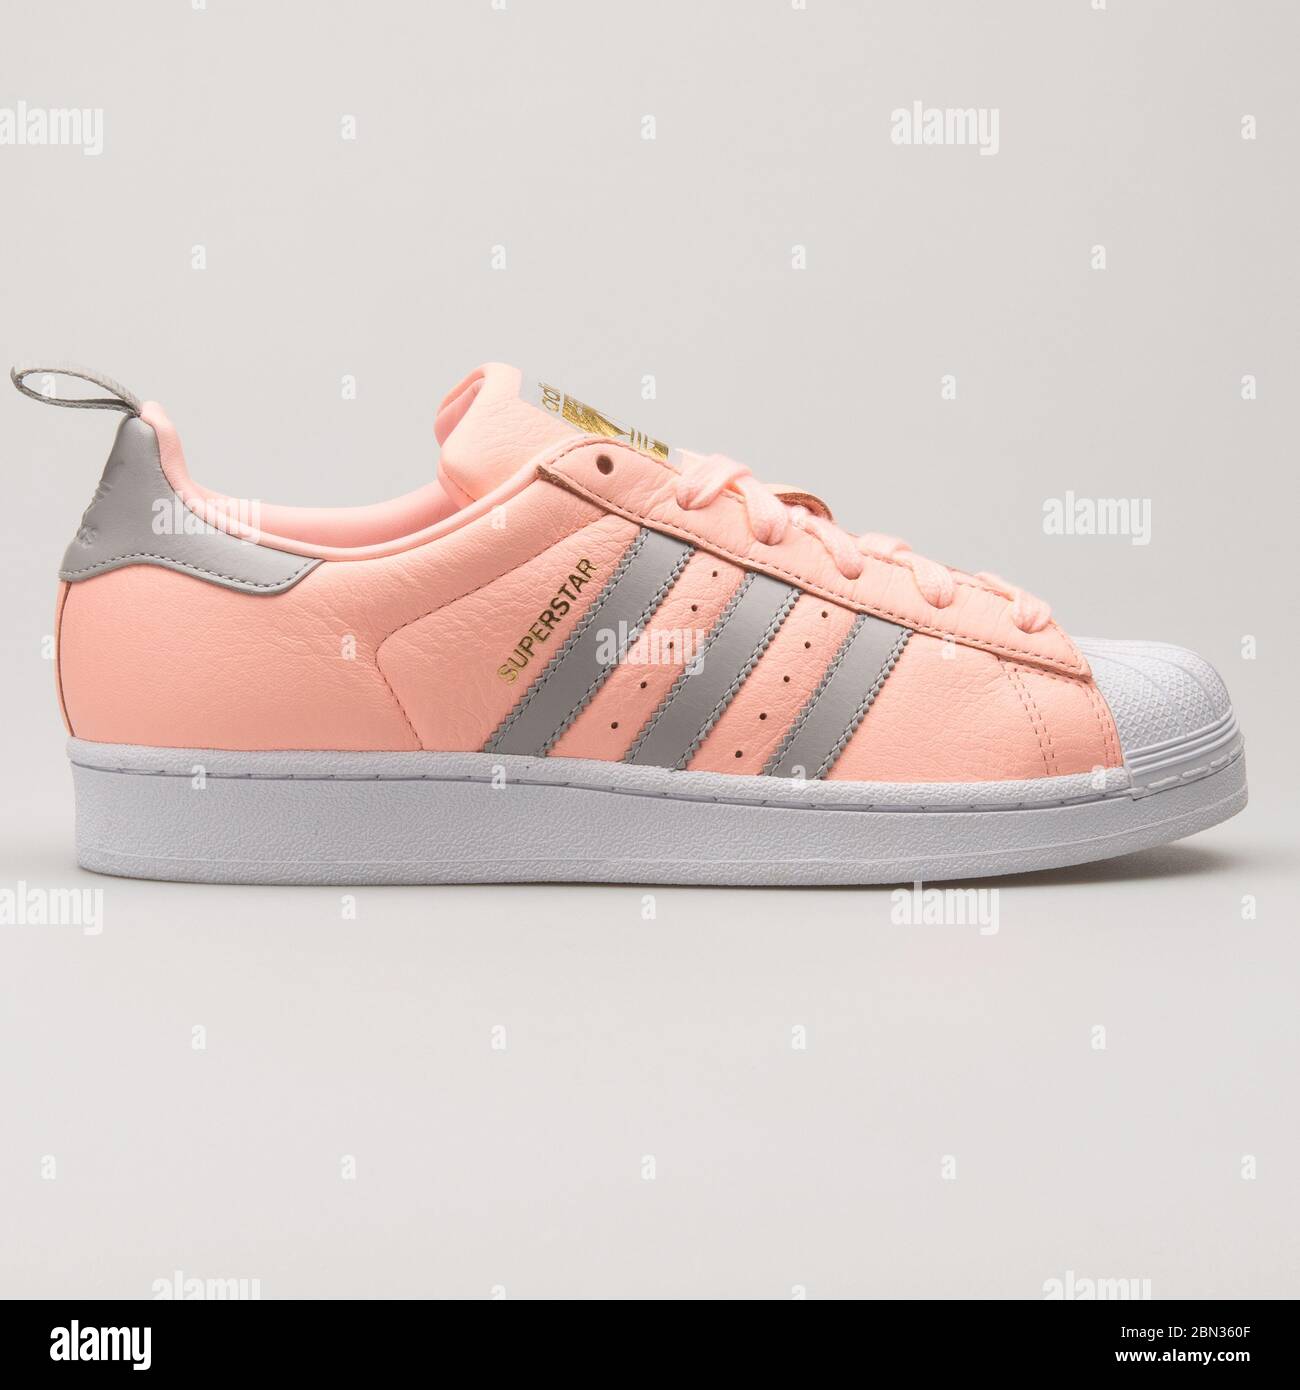 White And Gold Adidas Superstar Trainers Sneakers High Resolution Stock Photography And Images Alamy